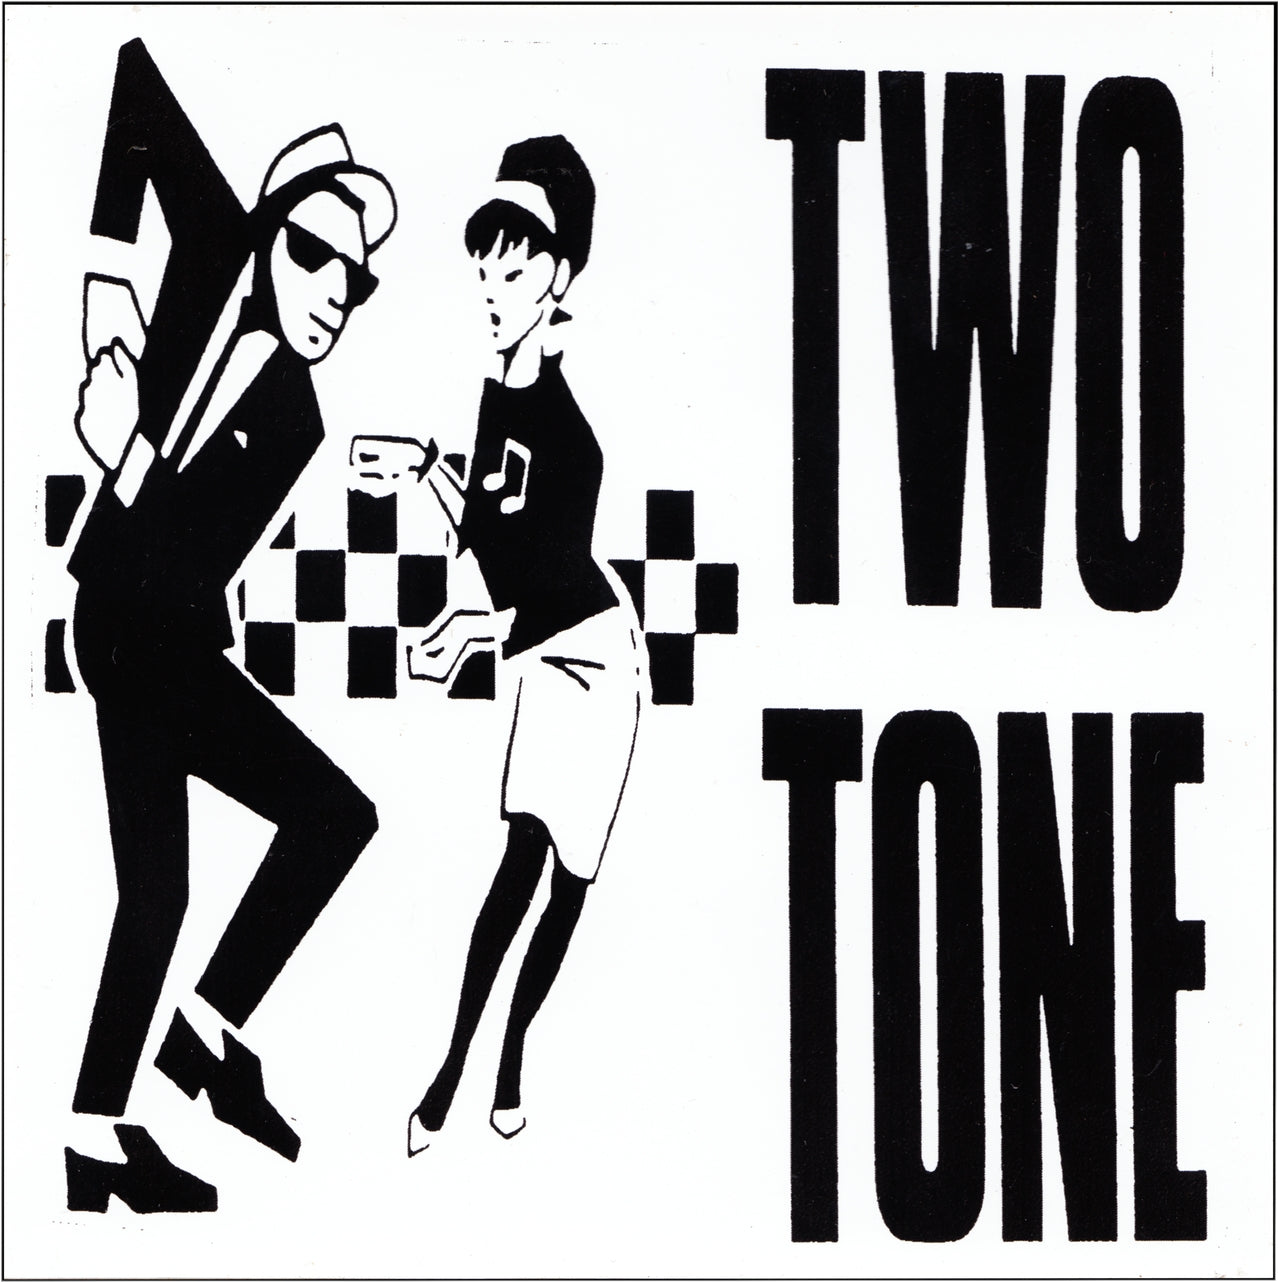 White square vinyl sticker with a black and white checkerboard pattern & rude boy and girl ska cartoons with caption “TWO TONE”